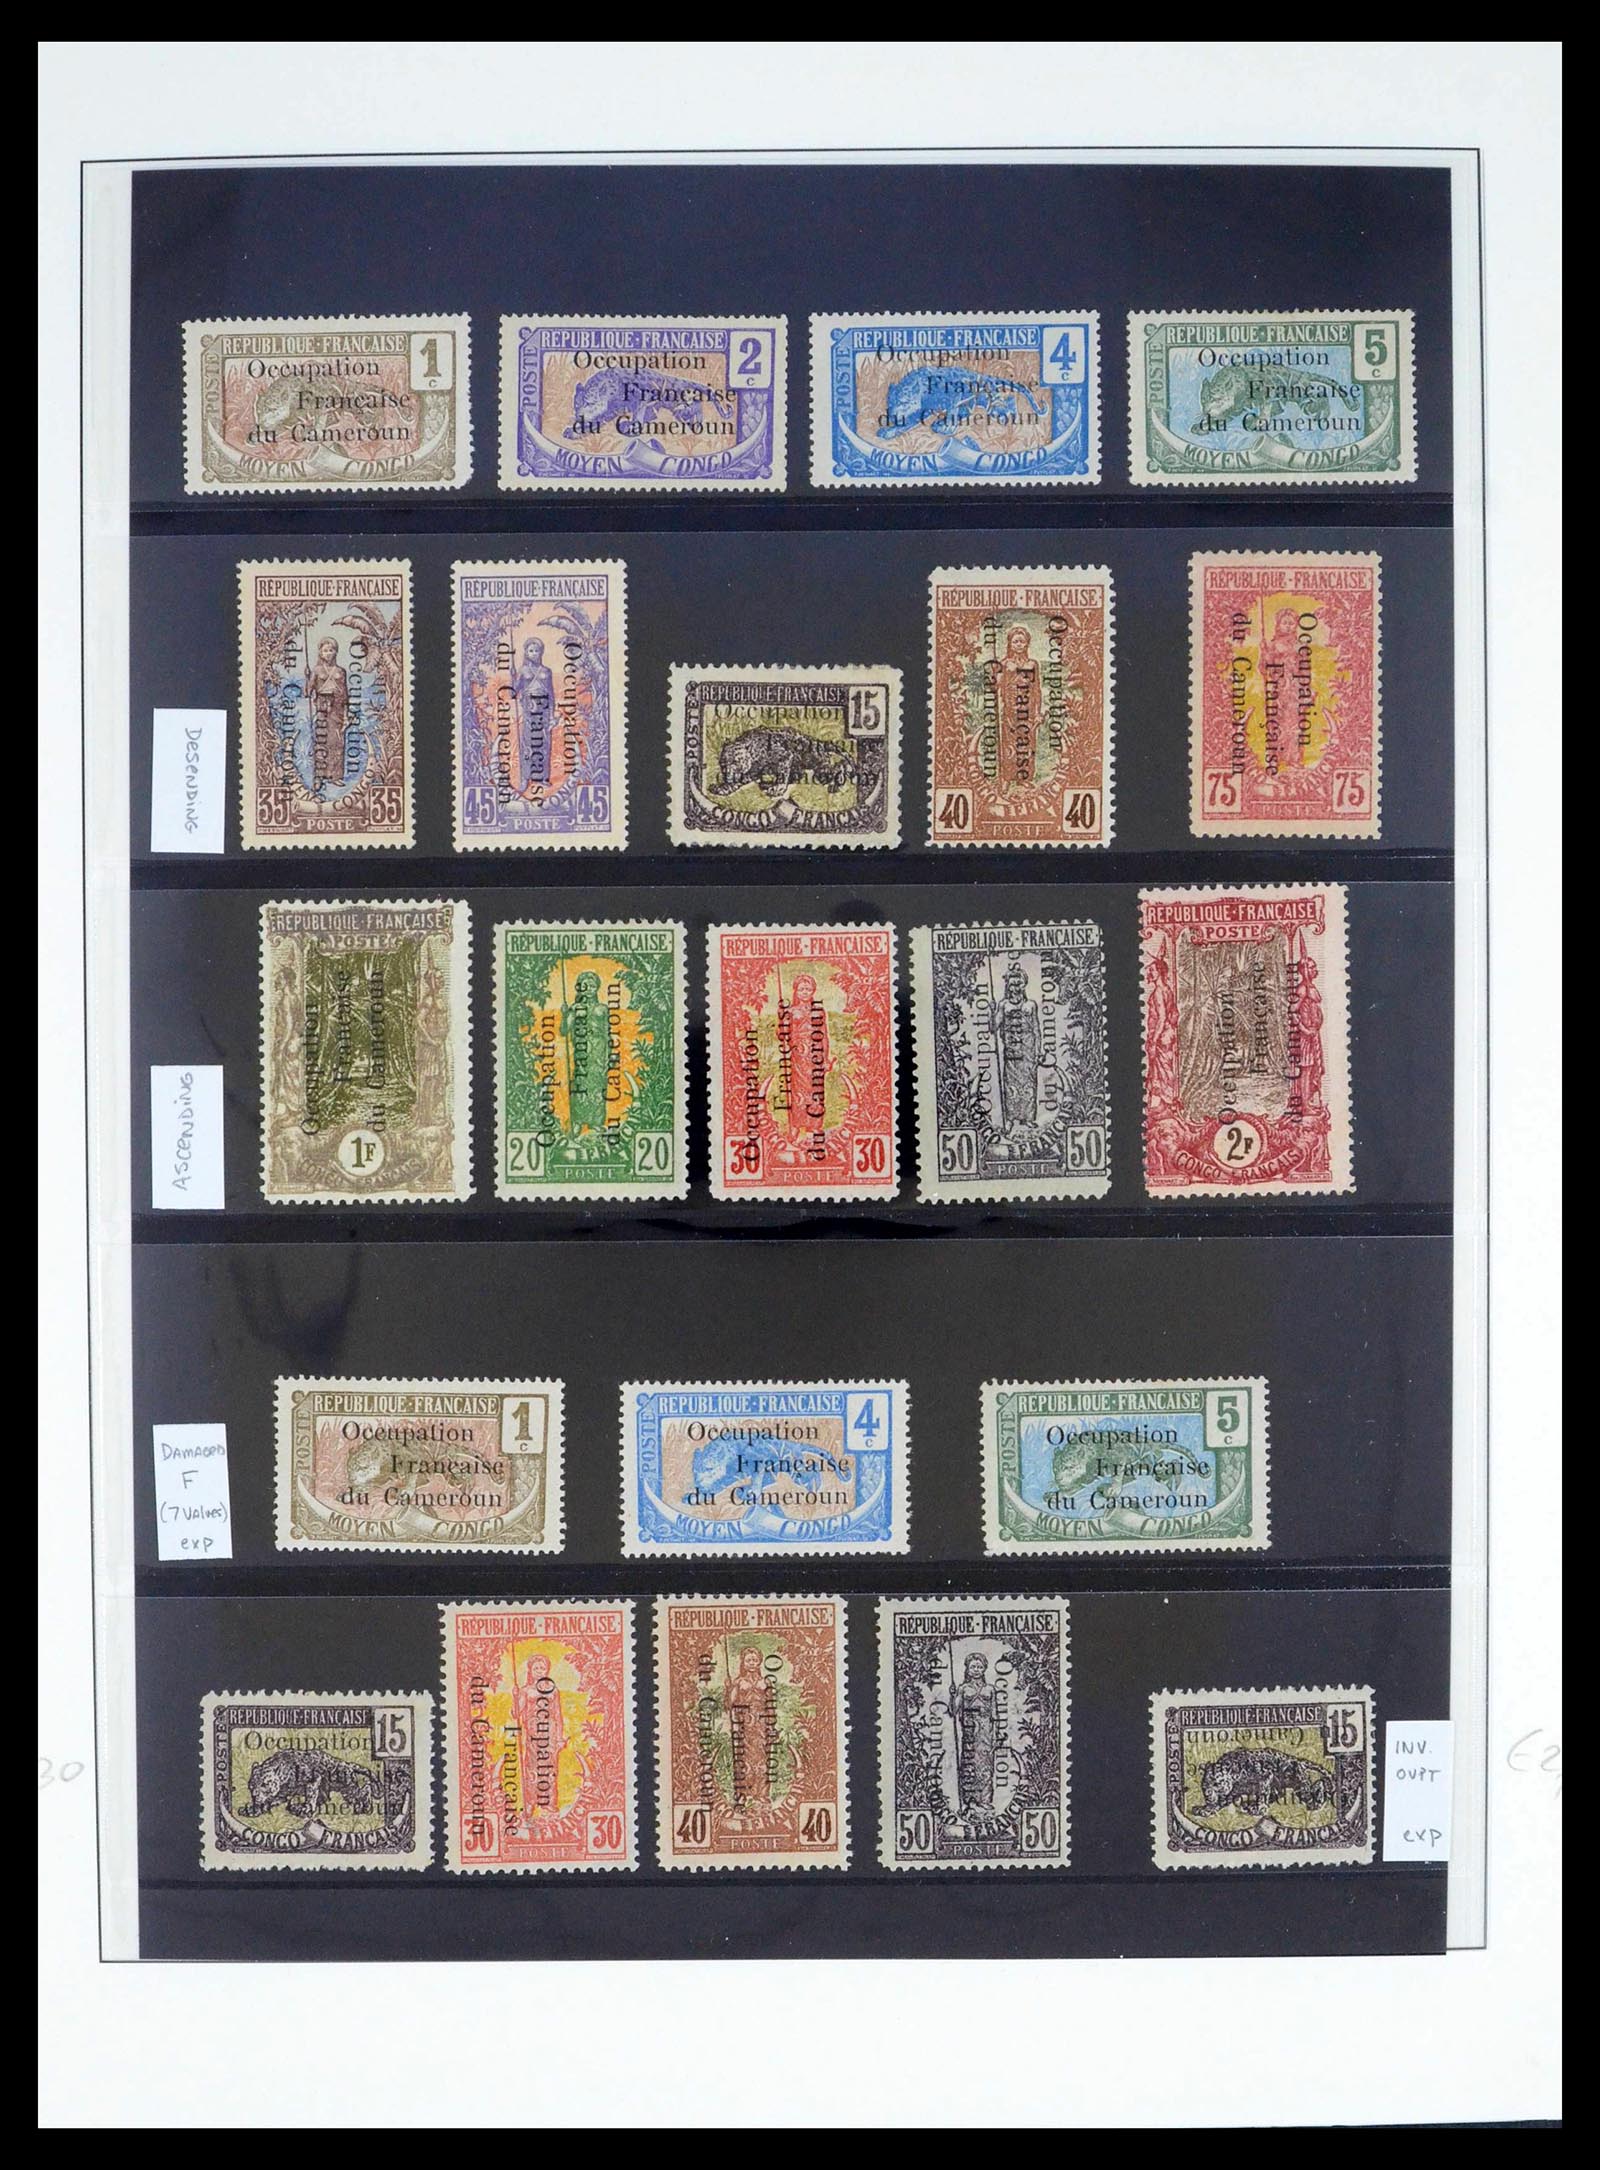 39485 0011 - Stamp collection 39485 Cameroon 1915-1928.